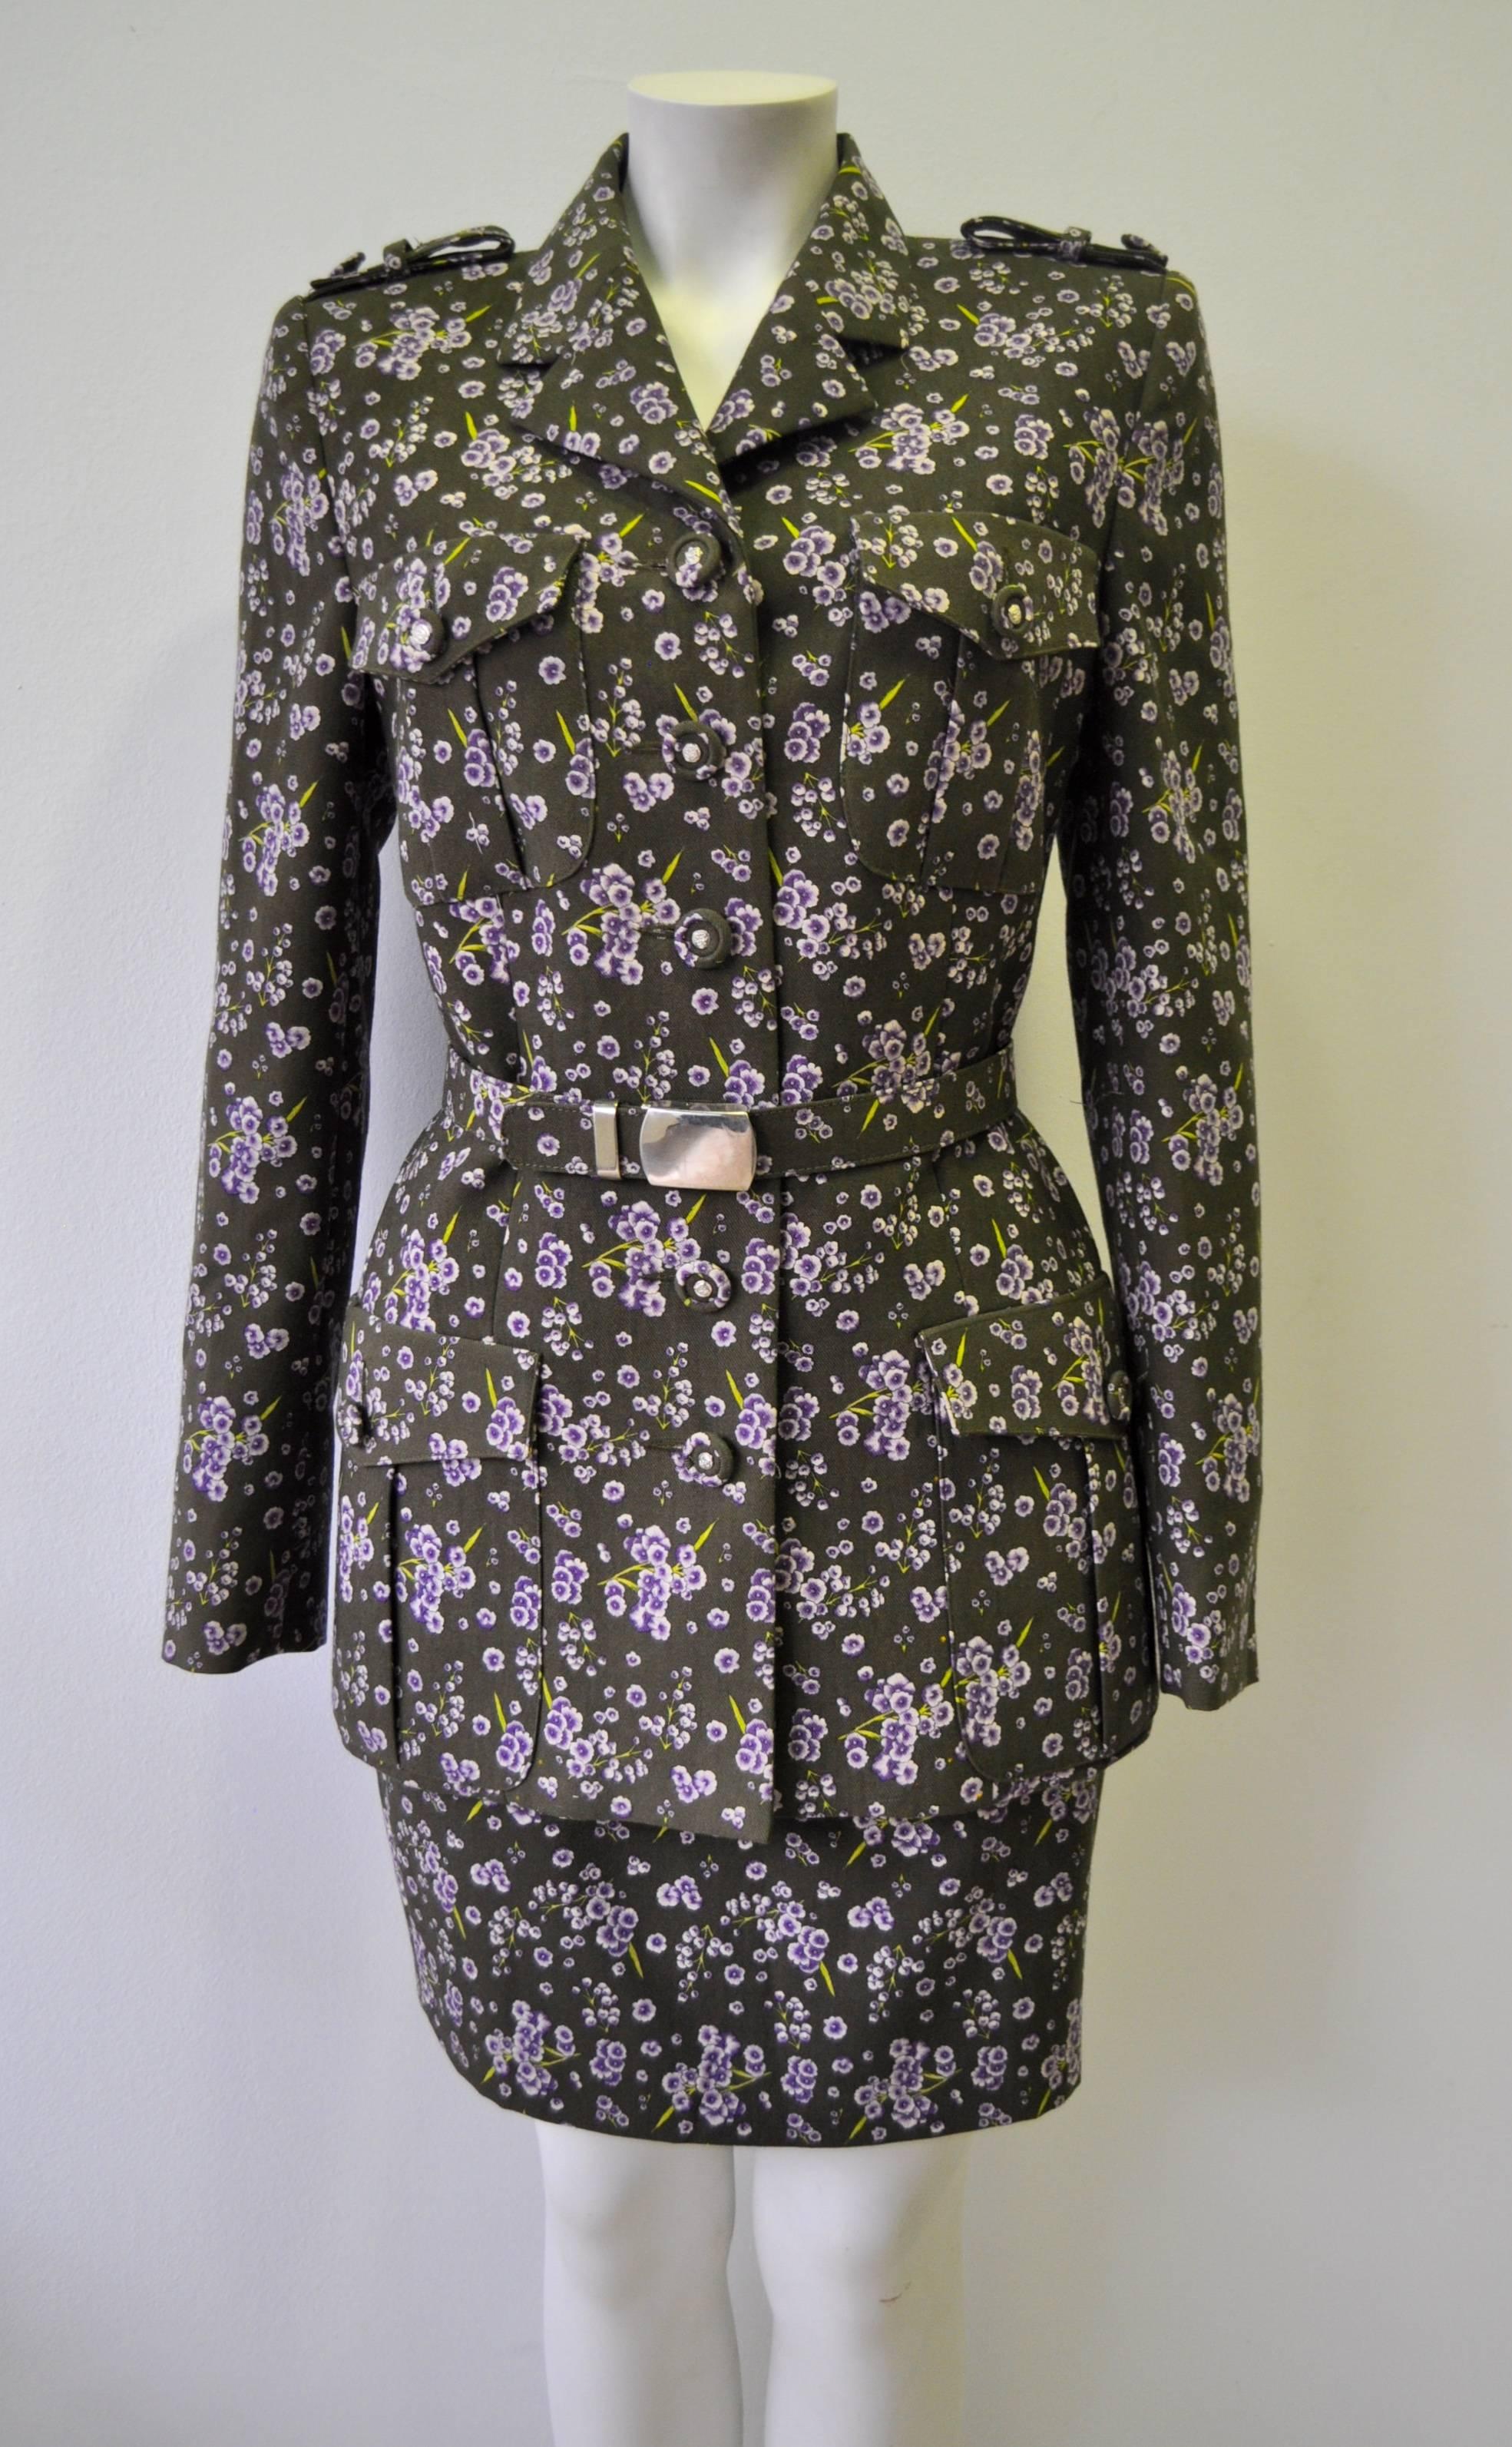 Very Rare Gianni Versace Istante 100% Virgin Wool Floral Militaire Mini Skirt Suit